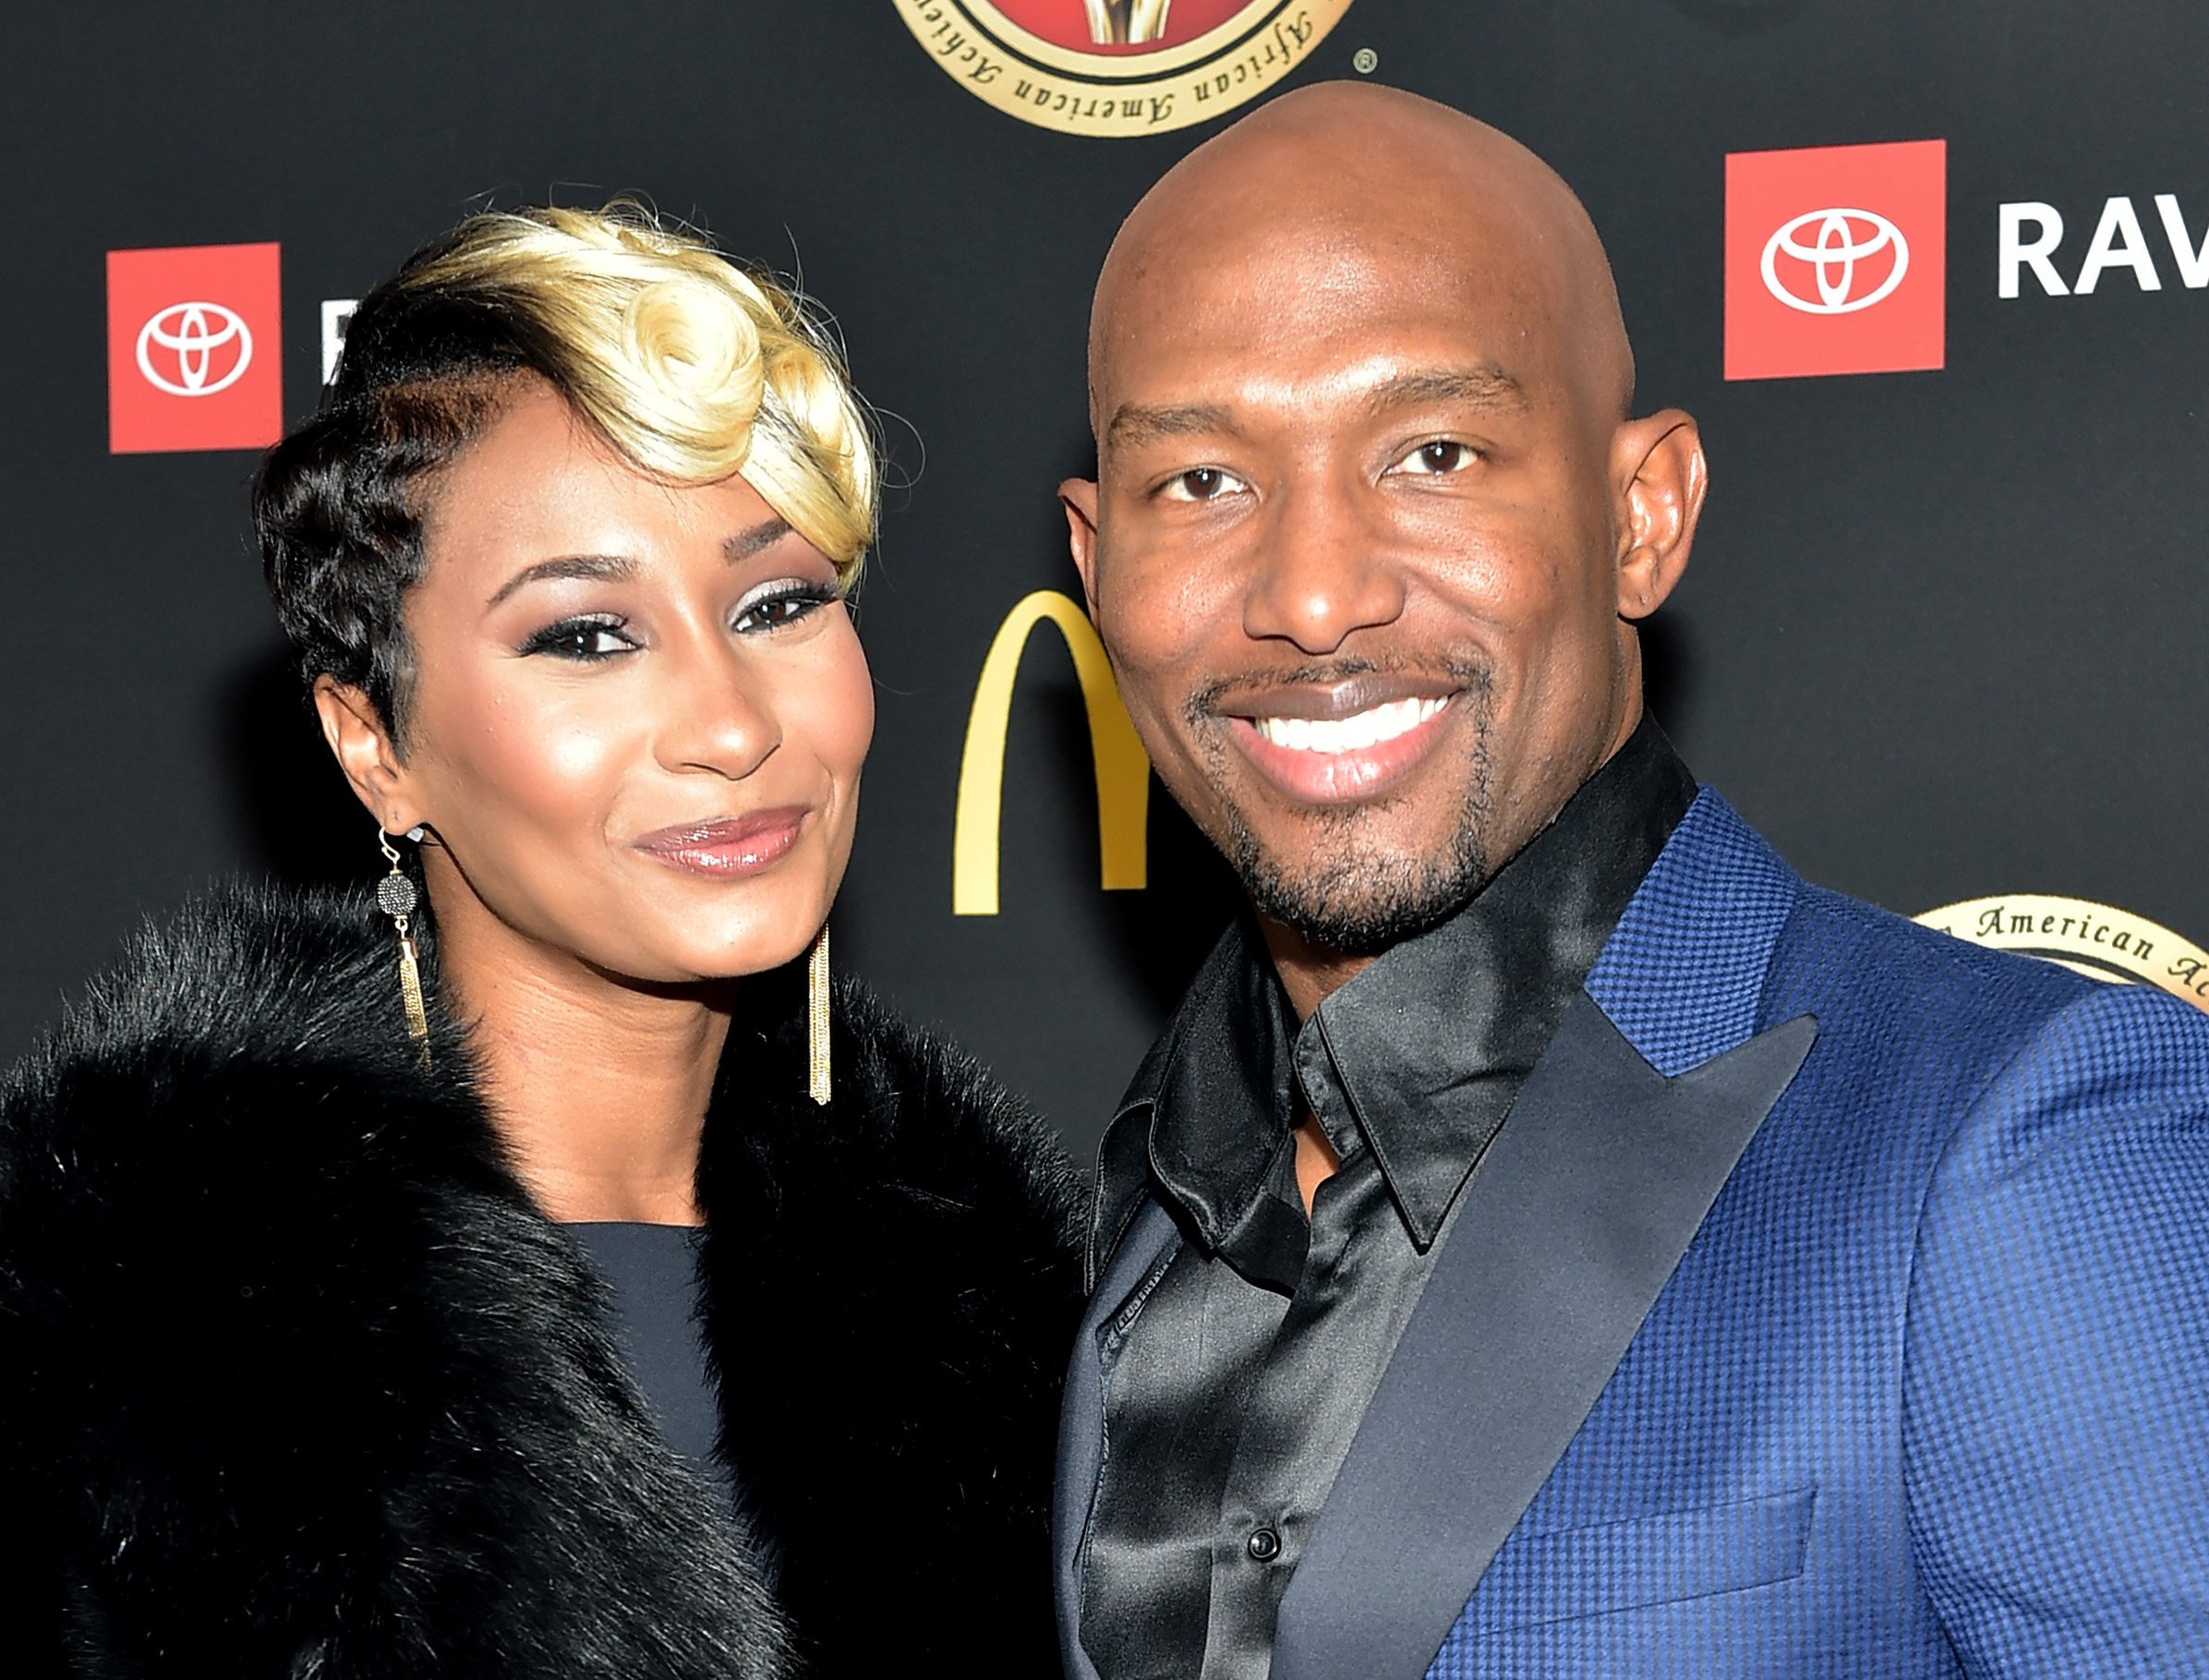 Martell and Melody Holt attend Trumpet Awards; Melody and Martell's mistress recently clashed over a family vacation Martell attended with his children and ex